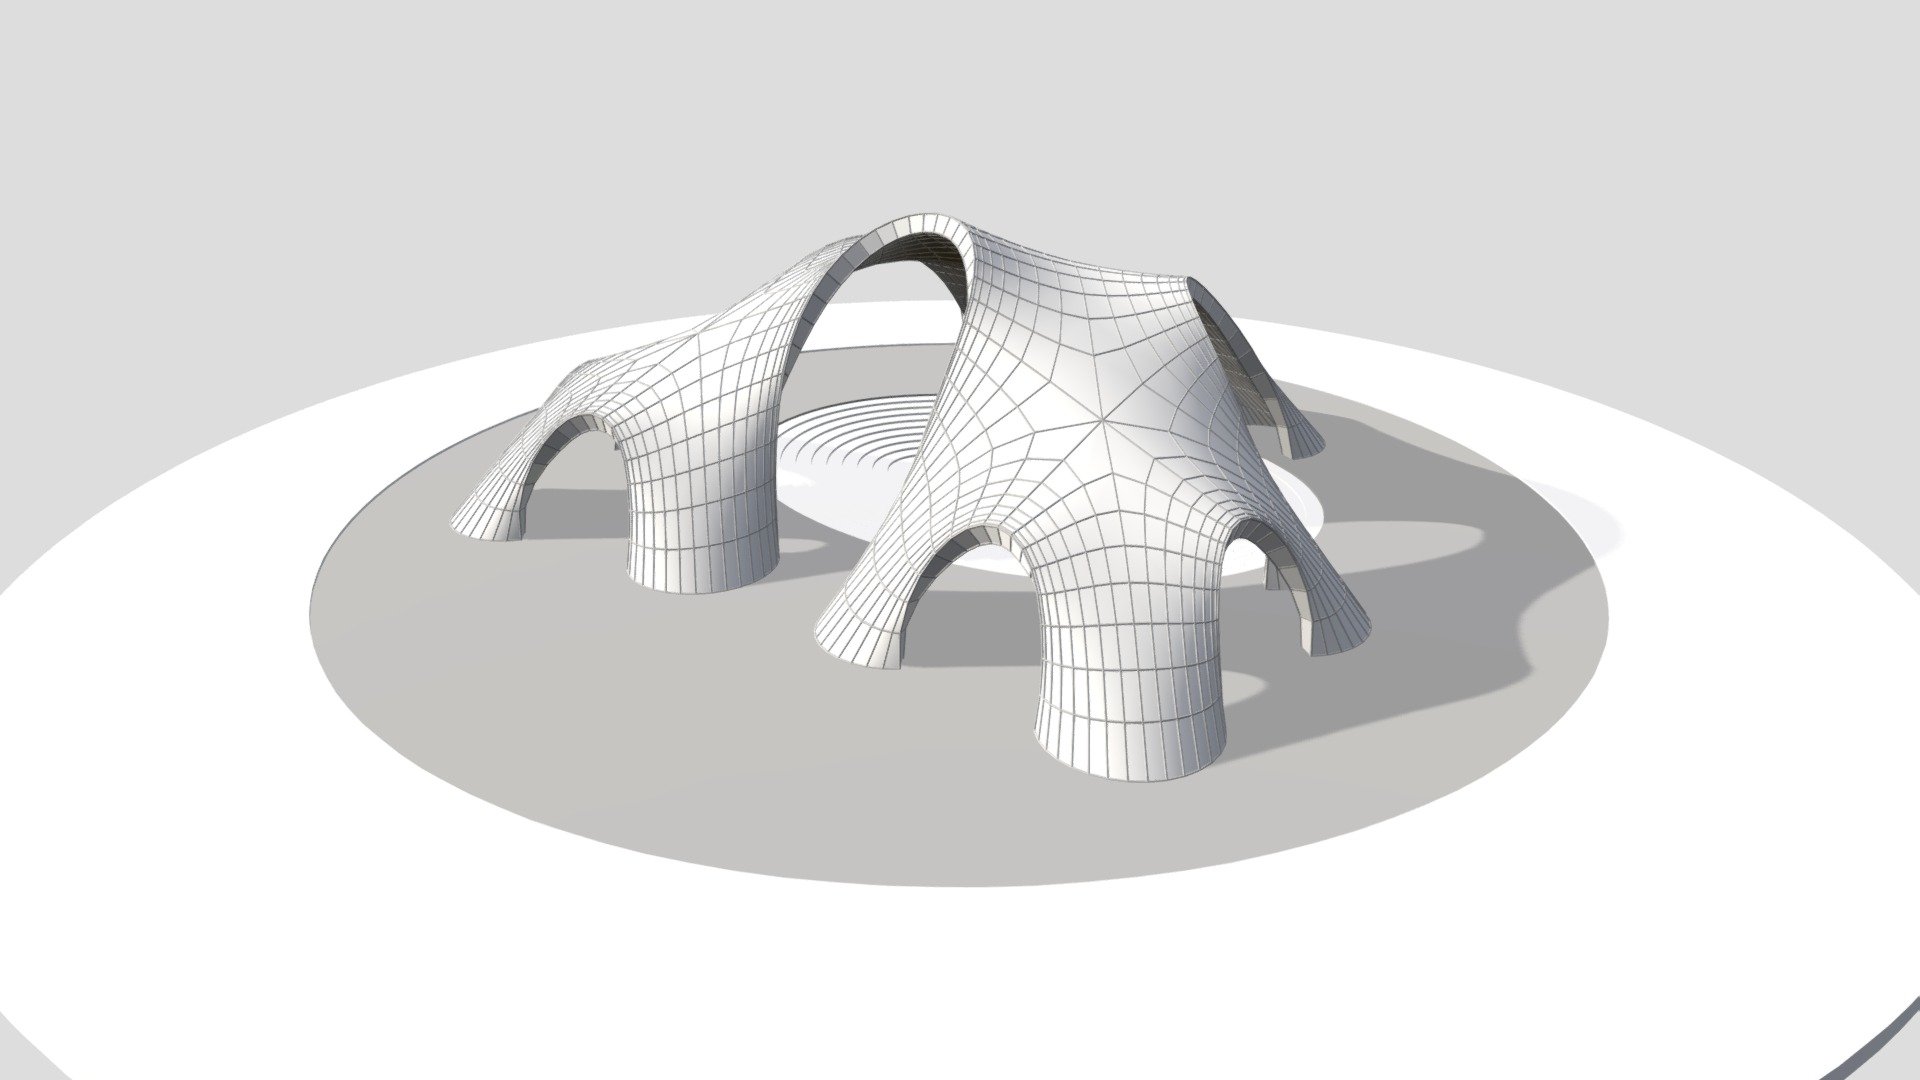 A Futuristic structure of Vault network surface with various large openings with an amphitheater elliptical steps in the middle, the sci-fi form represents a multipurpose open air landscape feature and can be a Landmark that gives a unique architectural spatial experience 3d model